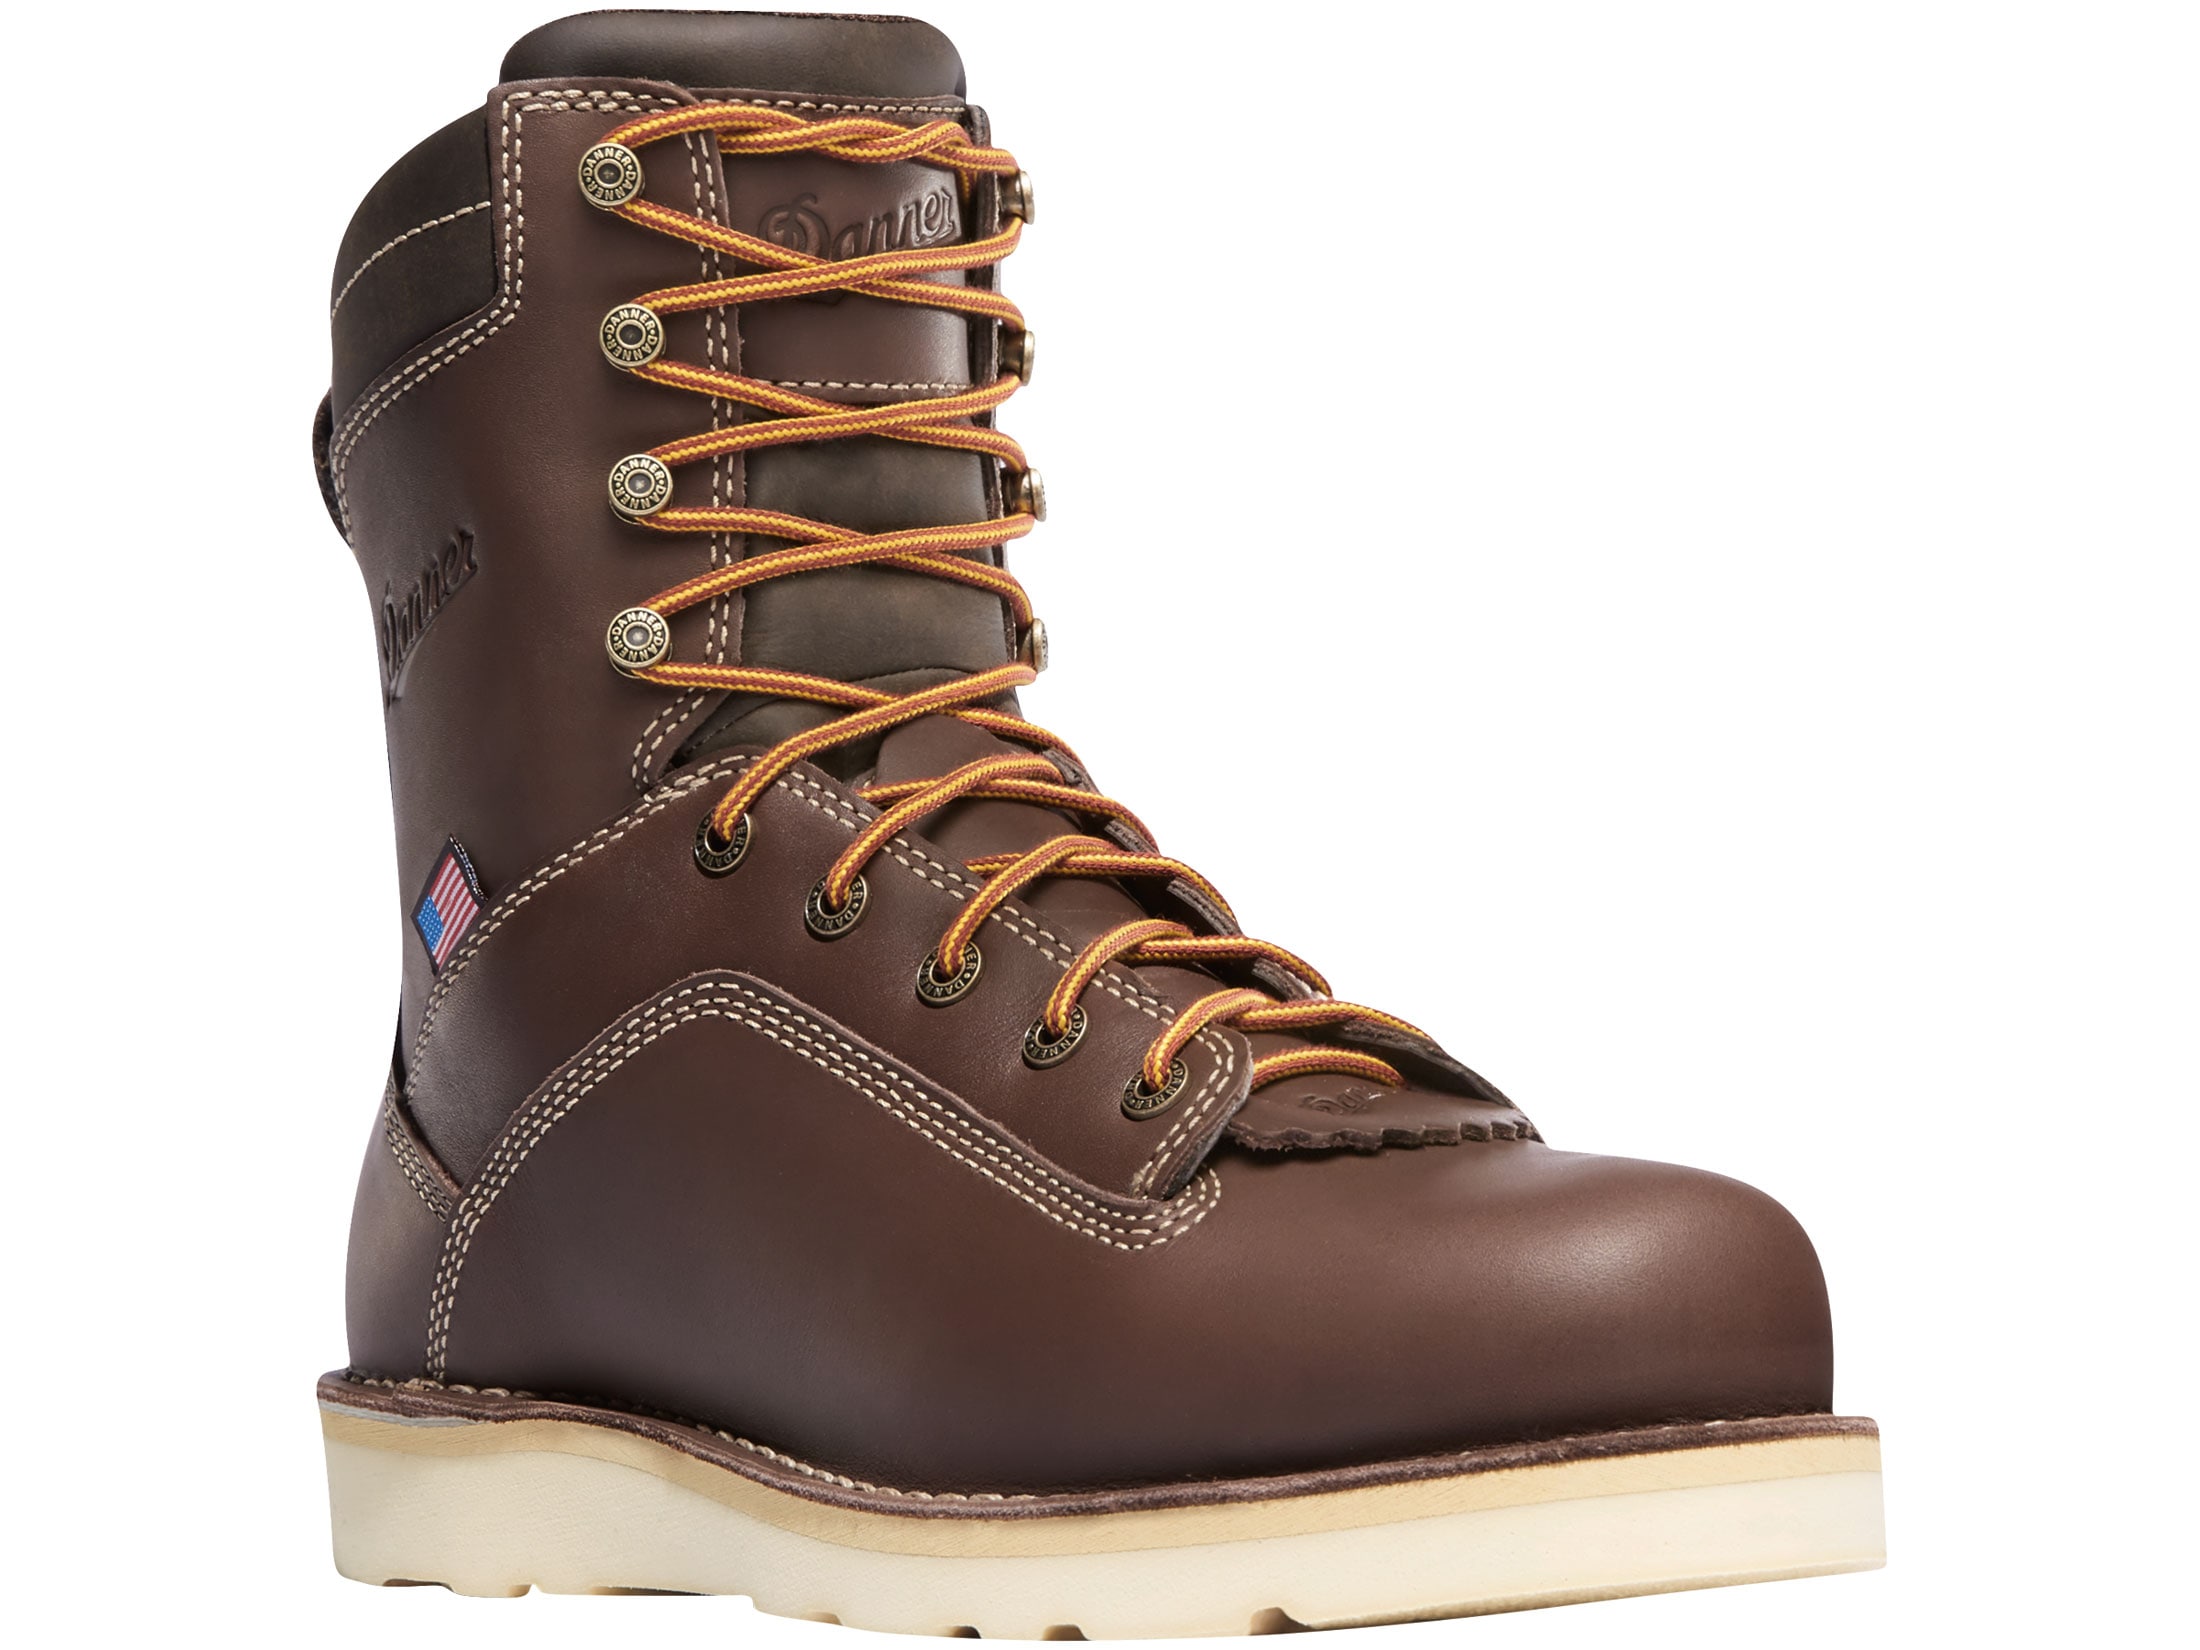 Danner Quarry USA 8 GORE-TEX Alloy Toe Work Boots Leather Brown Wedge